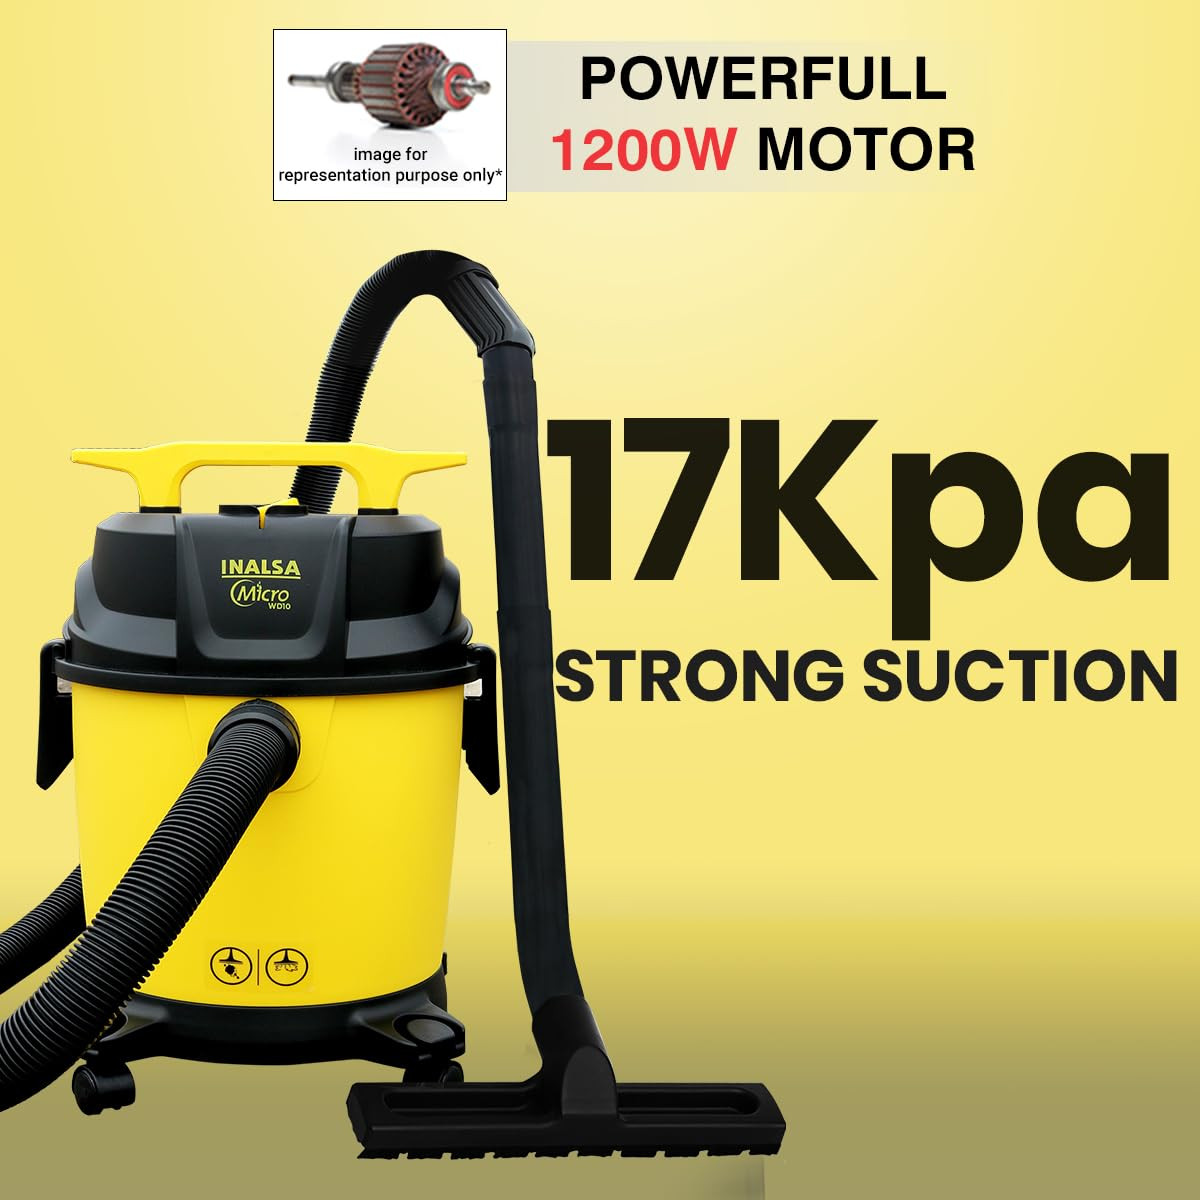 INALSA Wet and Dry Vacuum Cleaner for Home10 ltr Capacity1200 W 17 kPa Suction  Blower Function  HEPA Filter Wet Vacuum Cleaner for Sofa House Cleaning MachineVaccine Cleaner for HomeWD 10